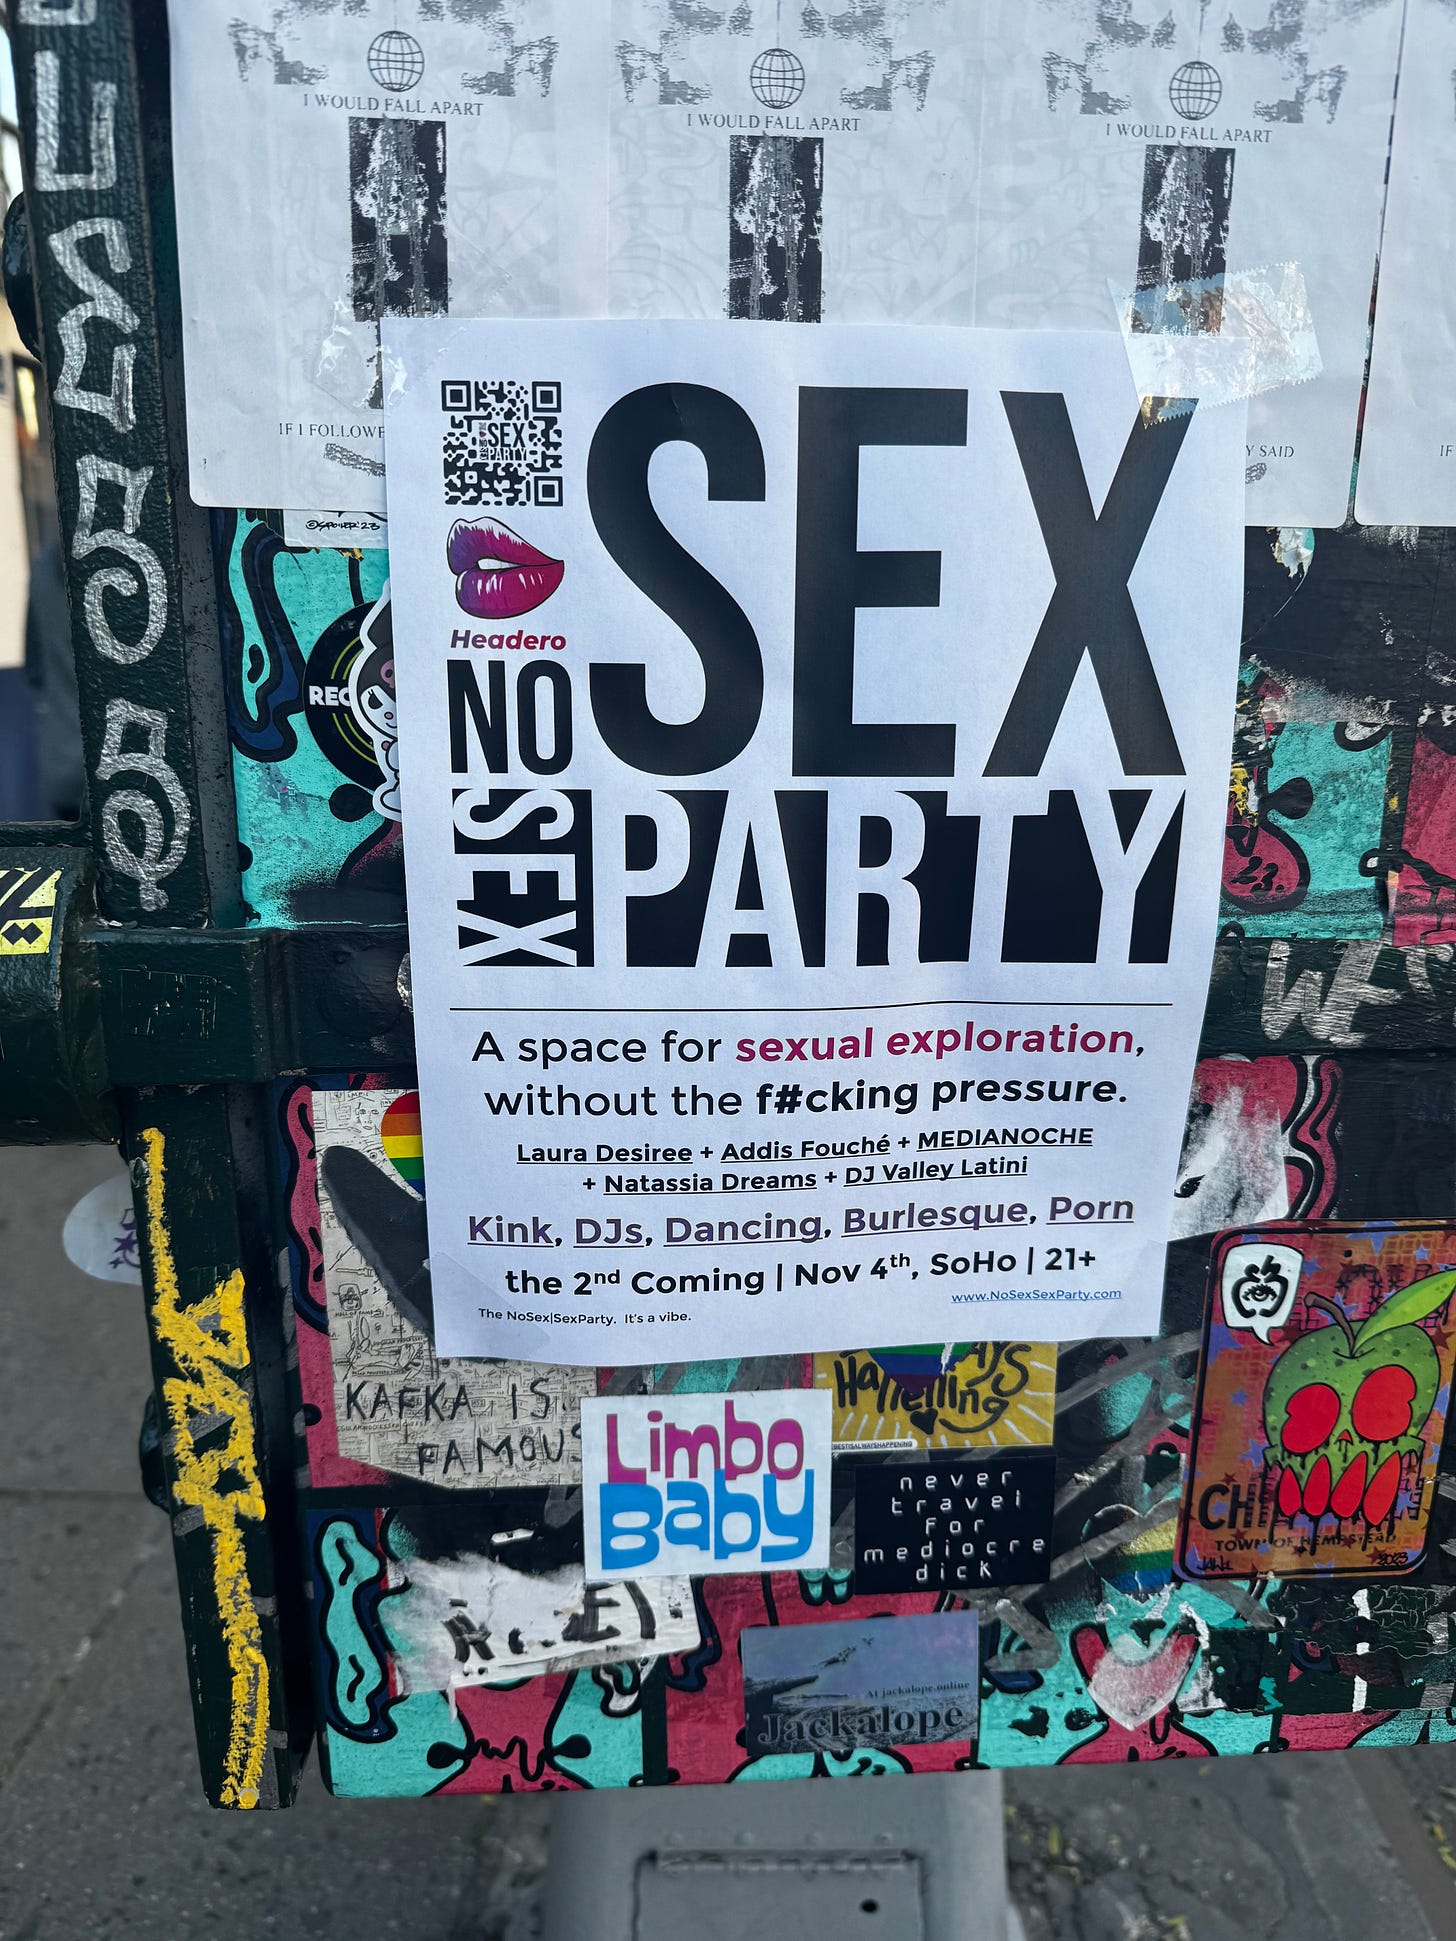 A poster in NYC for an event called a "No Sex Sex Party"